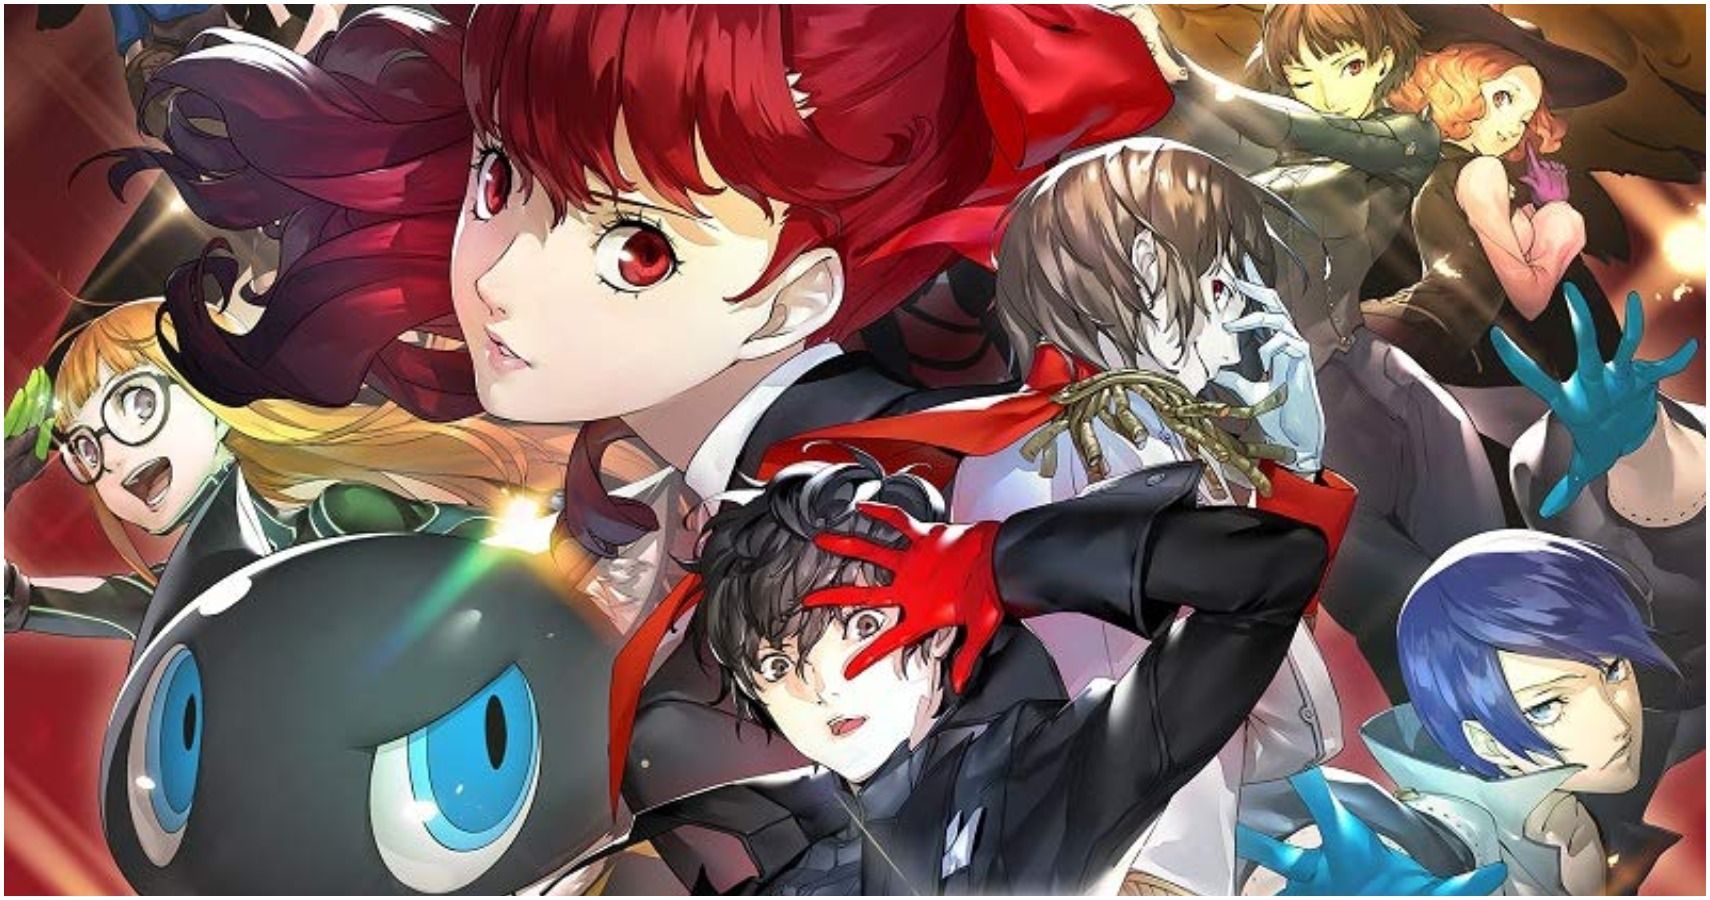 Persona 5 Royal Is Going To Have More Extra Content Than Persona 4 Golden